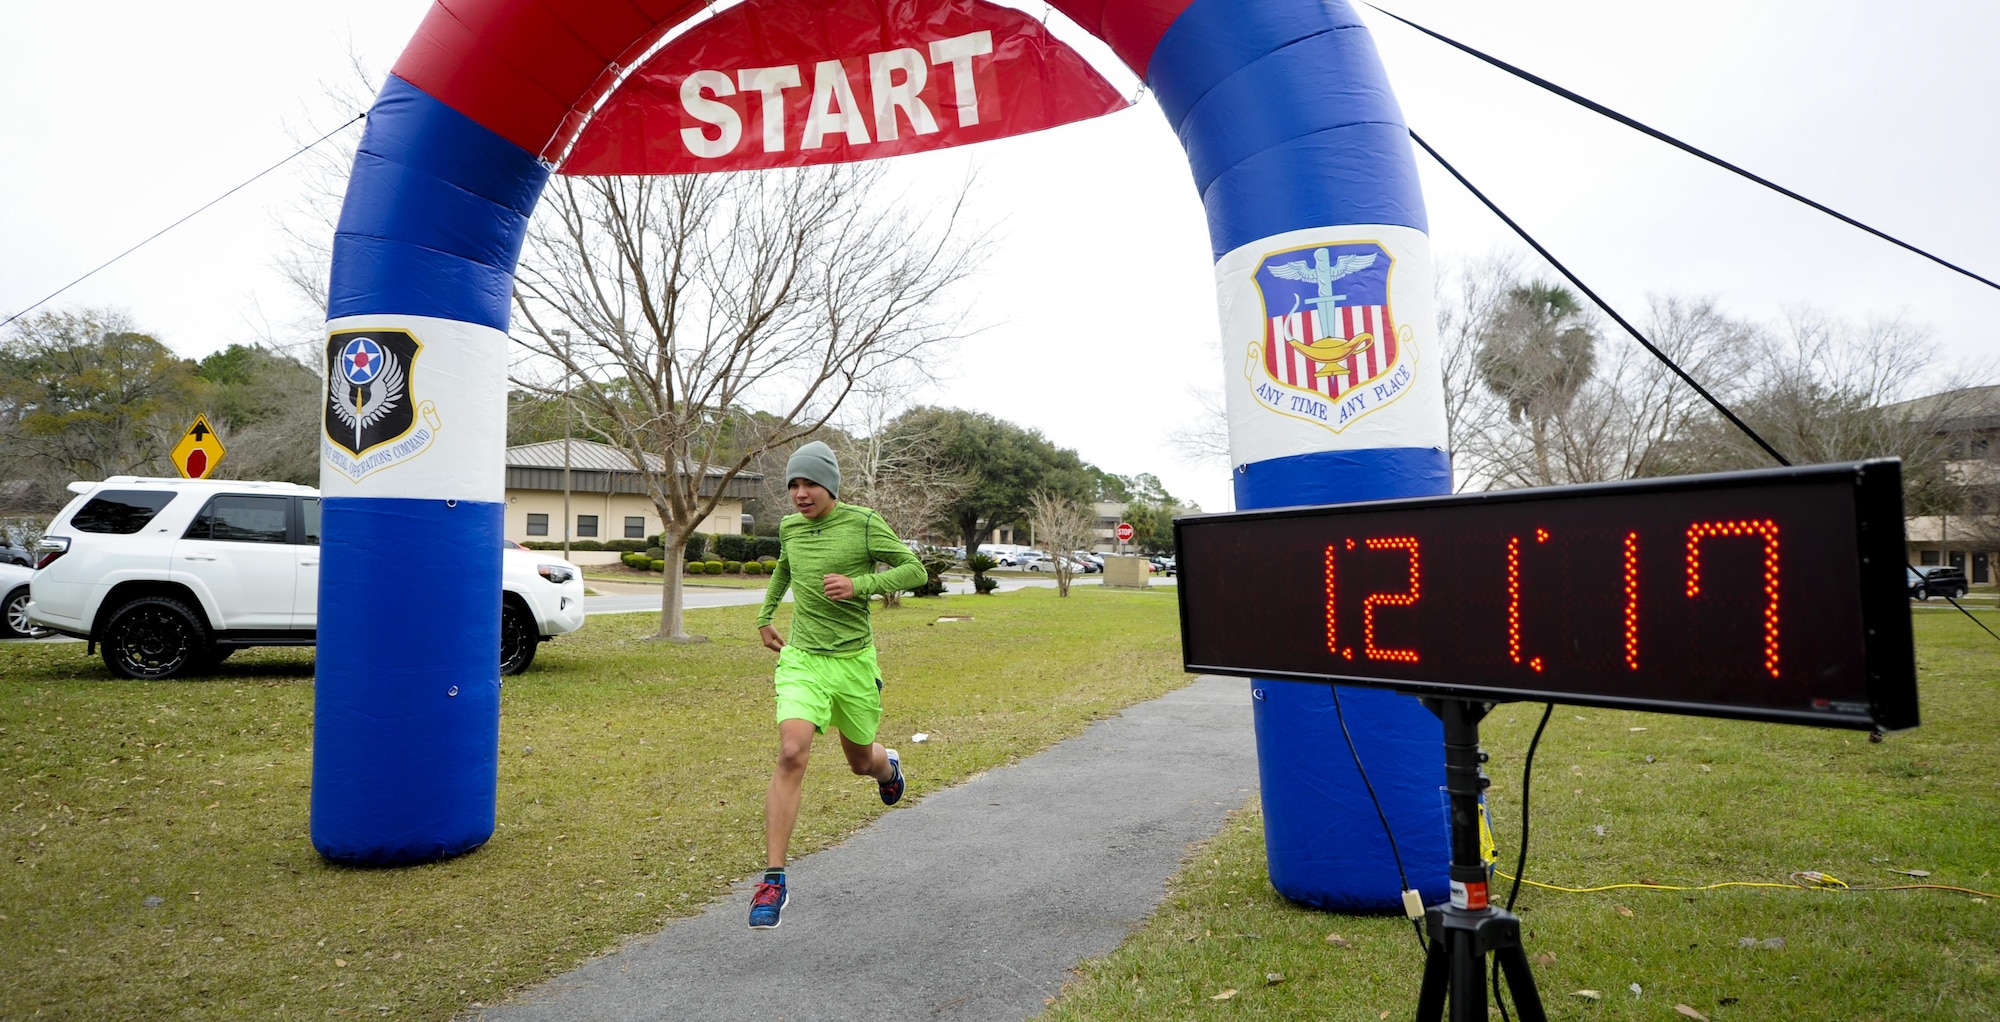 A runner is the first out of 139 runners to cross the finish line during a 5k at Hurlburt Field, Fla., Jan. 28, 2017. The 1st Special Operations Force Support Squadron held a 5k event and a half-marathon for Air Commandos and their families. The 5k event began one hour after the half-marathon. (U.S. Air Force photo by Airman Dennis Spain)